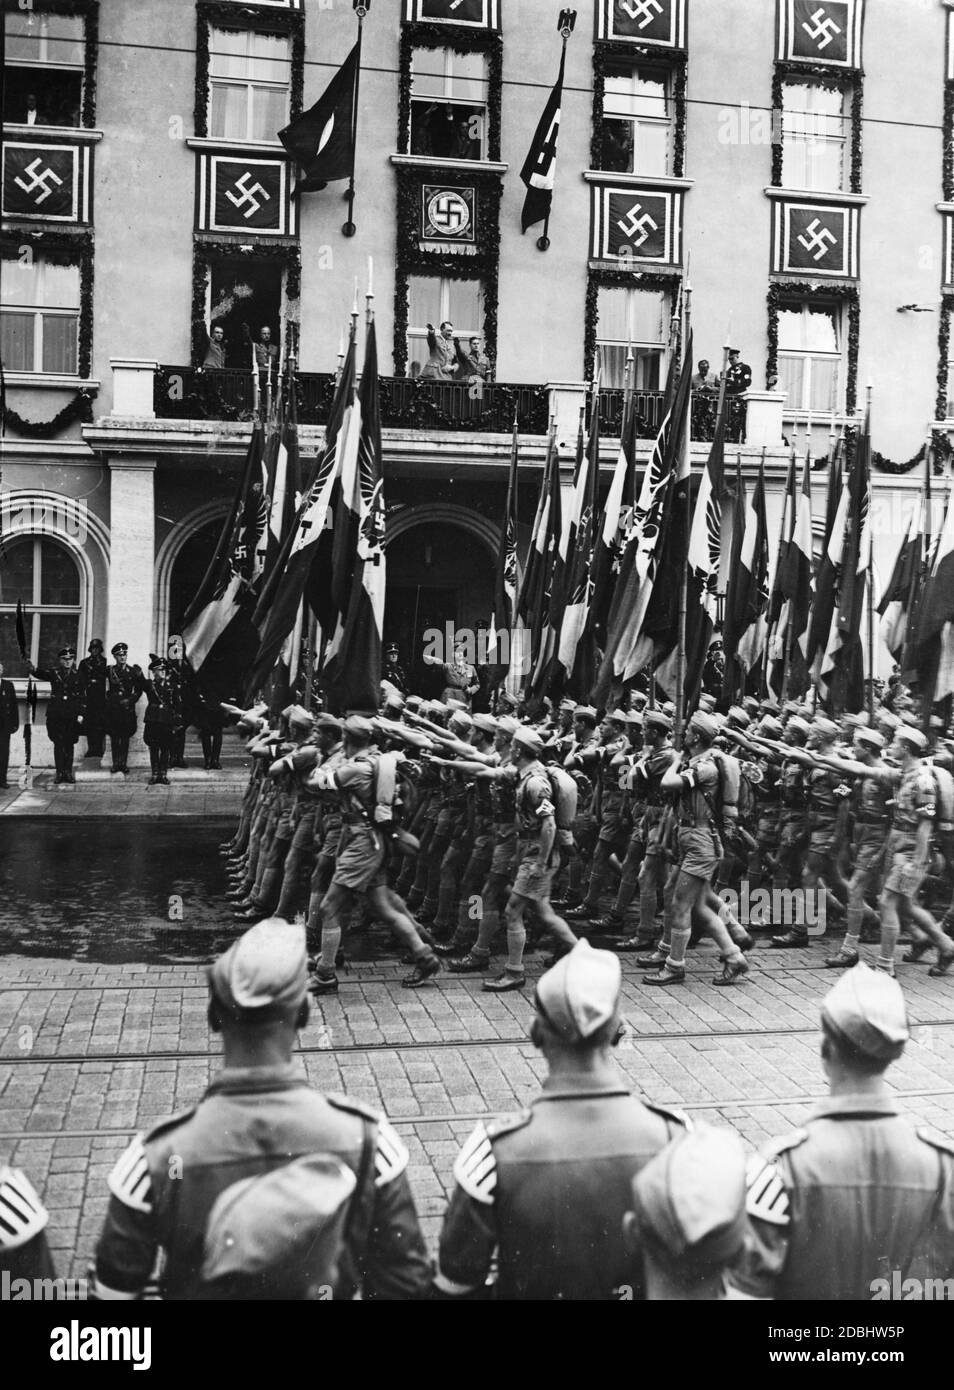 'Adolf Hitler, on the balcony of the ''Deutscher Hof'', takes the salute of the about 1,600 participants of the Adolf Hitler March of the Hitler Youth. Next to Hitler stands the Reich Youth Leader Baldur von Schirach. At the left window is Martin Bormann, at the right Heinrich Hoffmann.' Stock Photo